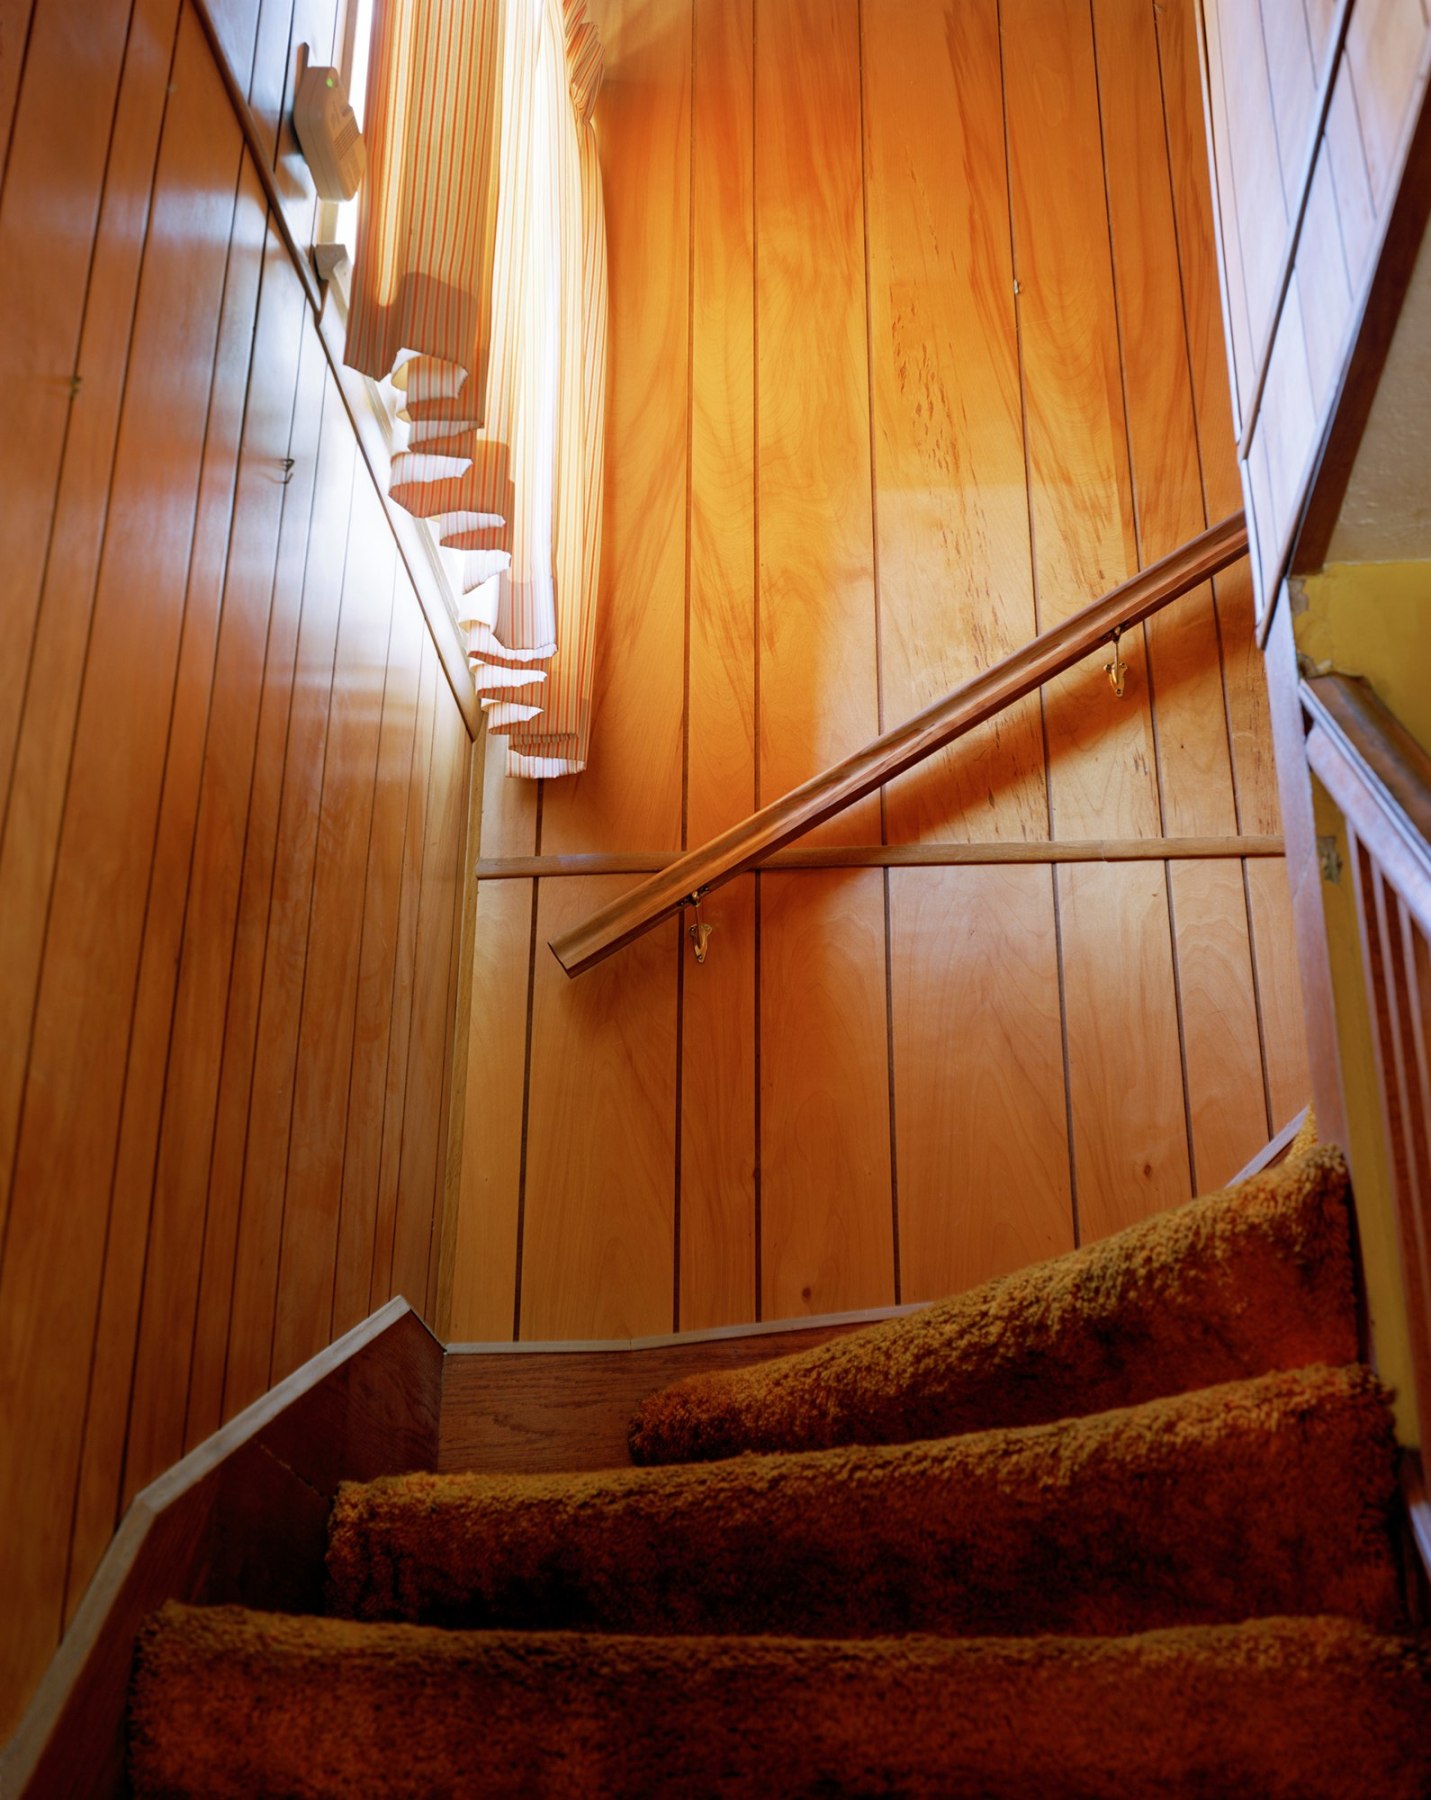 Photograph looking up carpeted stairs with faux wood panel walls, by Jade Doskow